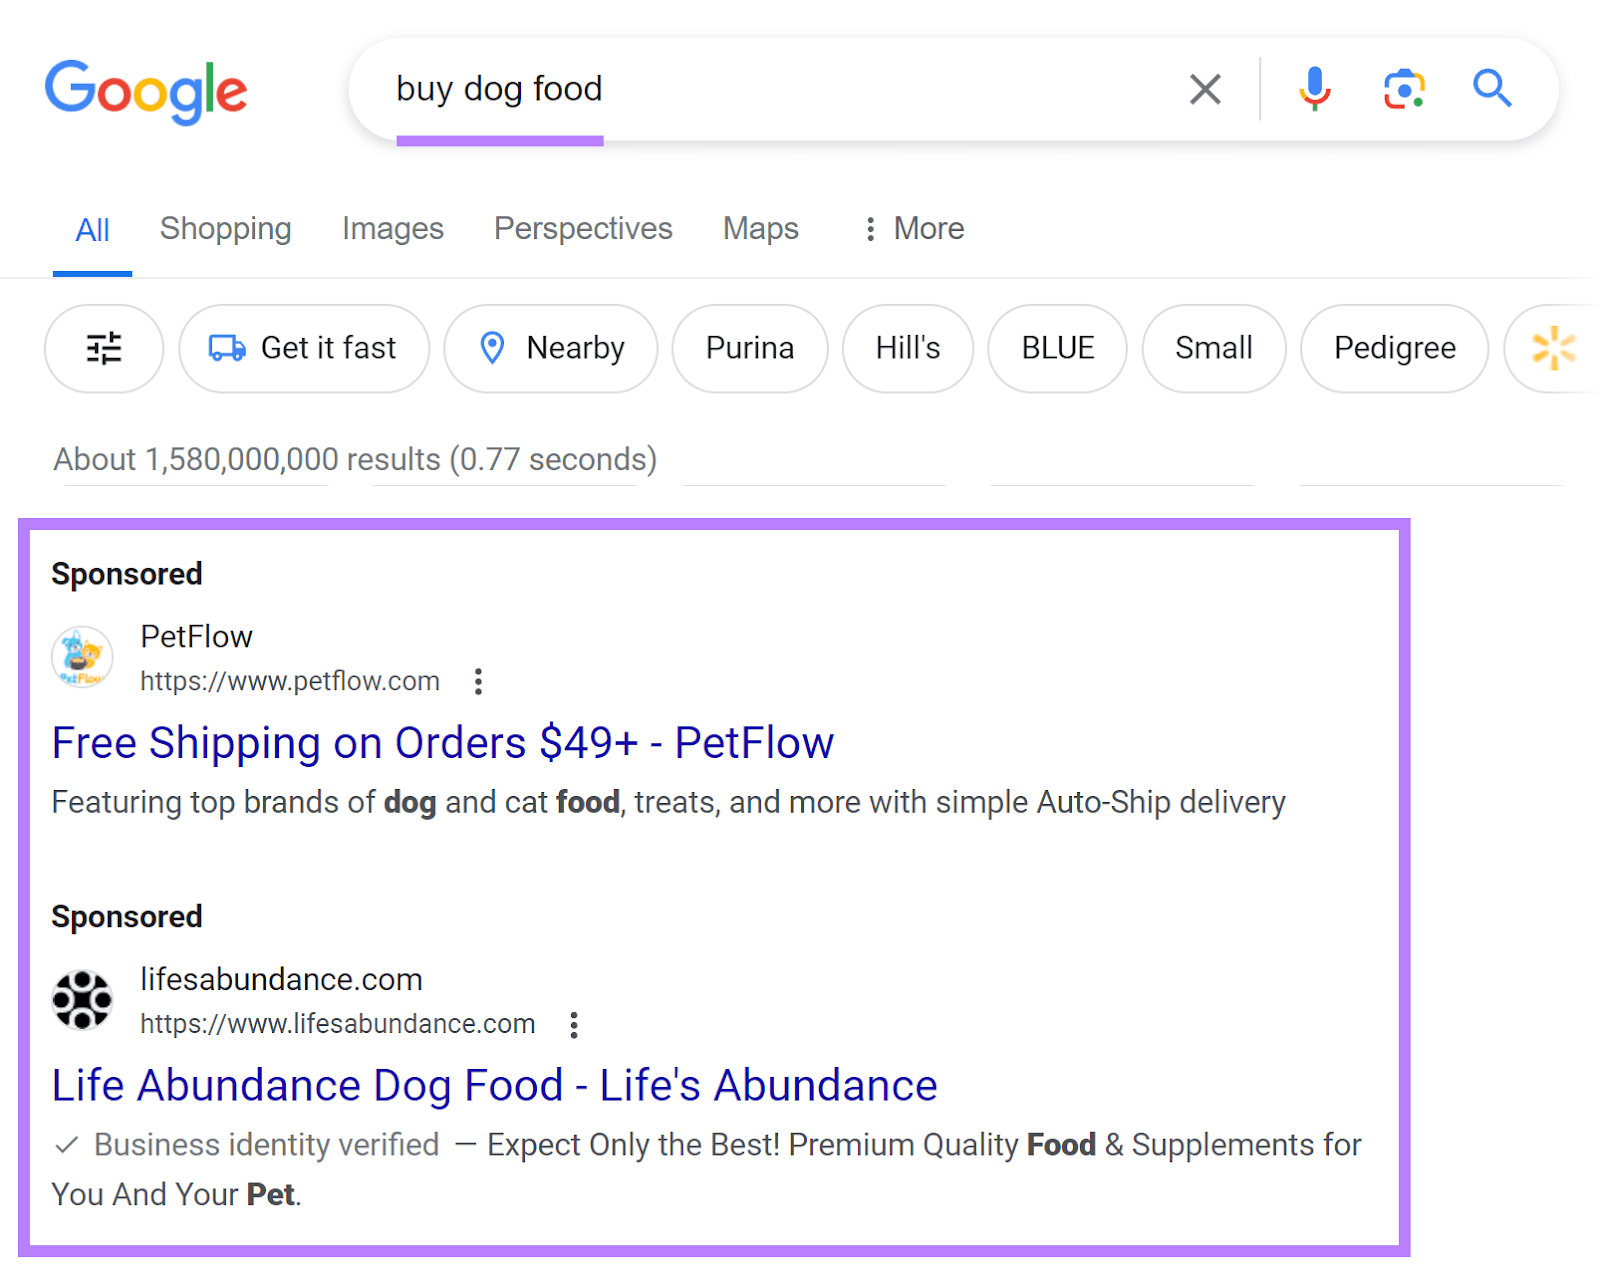 Search ads appearing on Google for